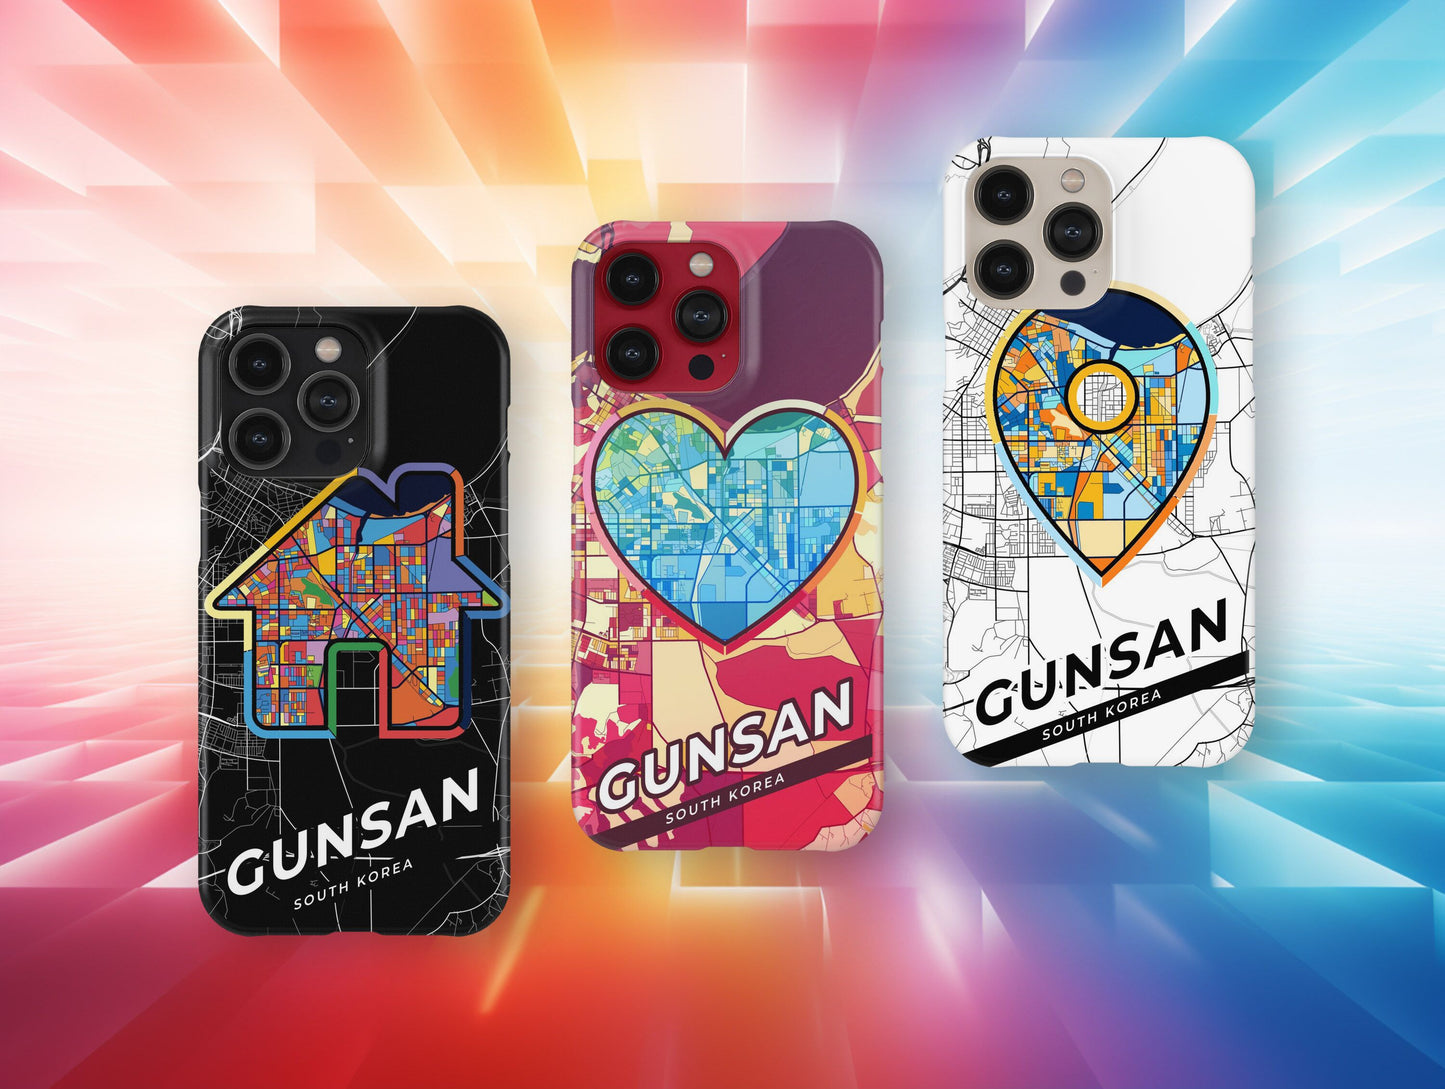 Gunsan South Korea slim phone case with colorful icon. Birthday, wedding or housewarming gift. Couple match cases.